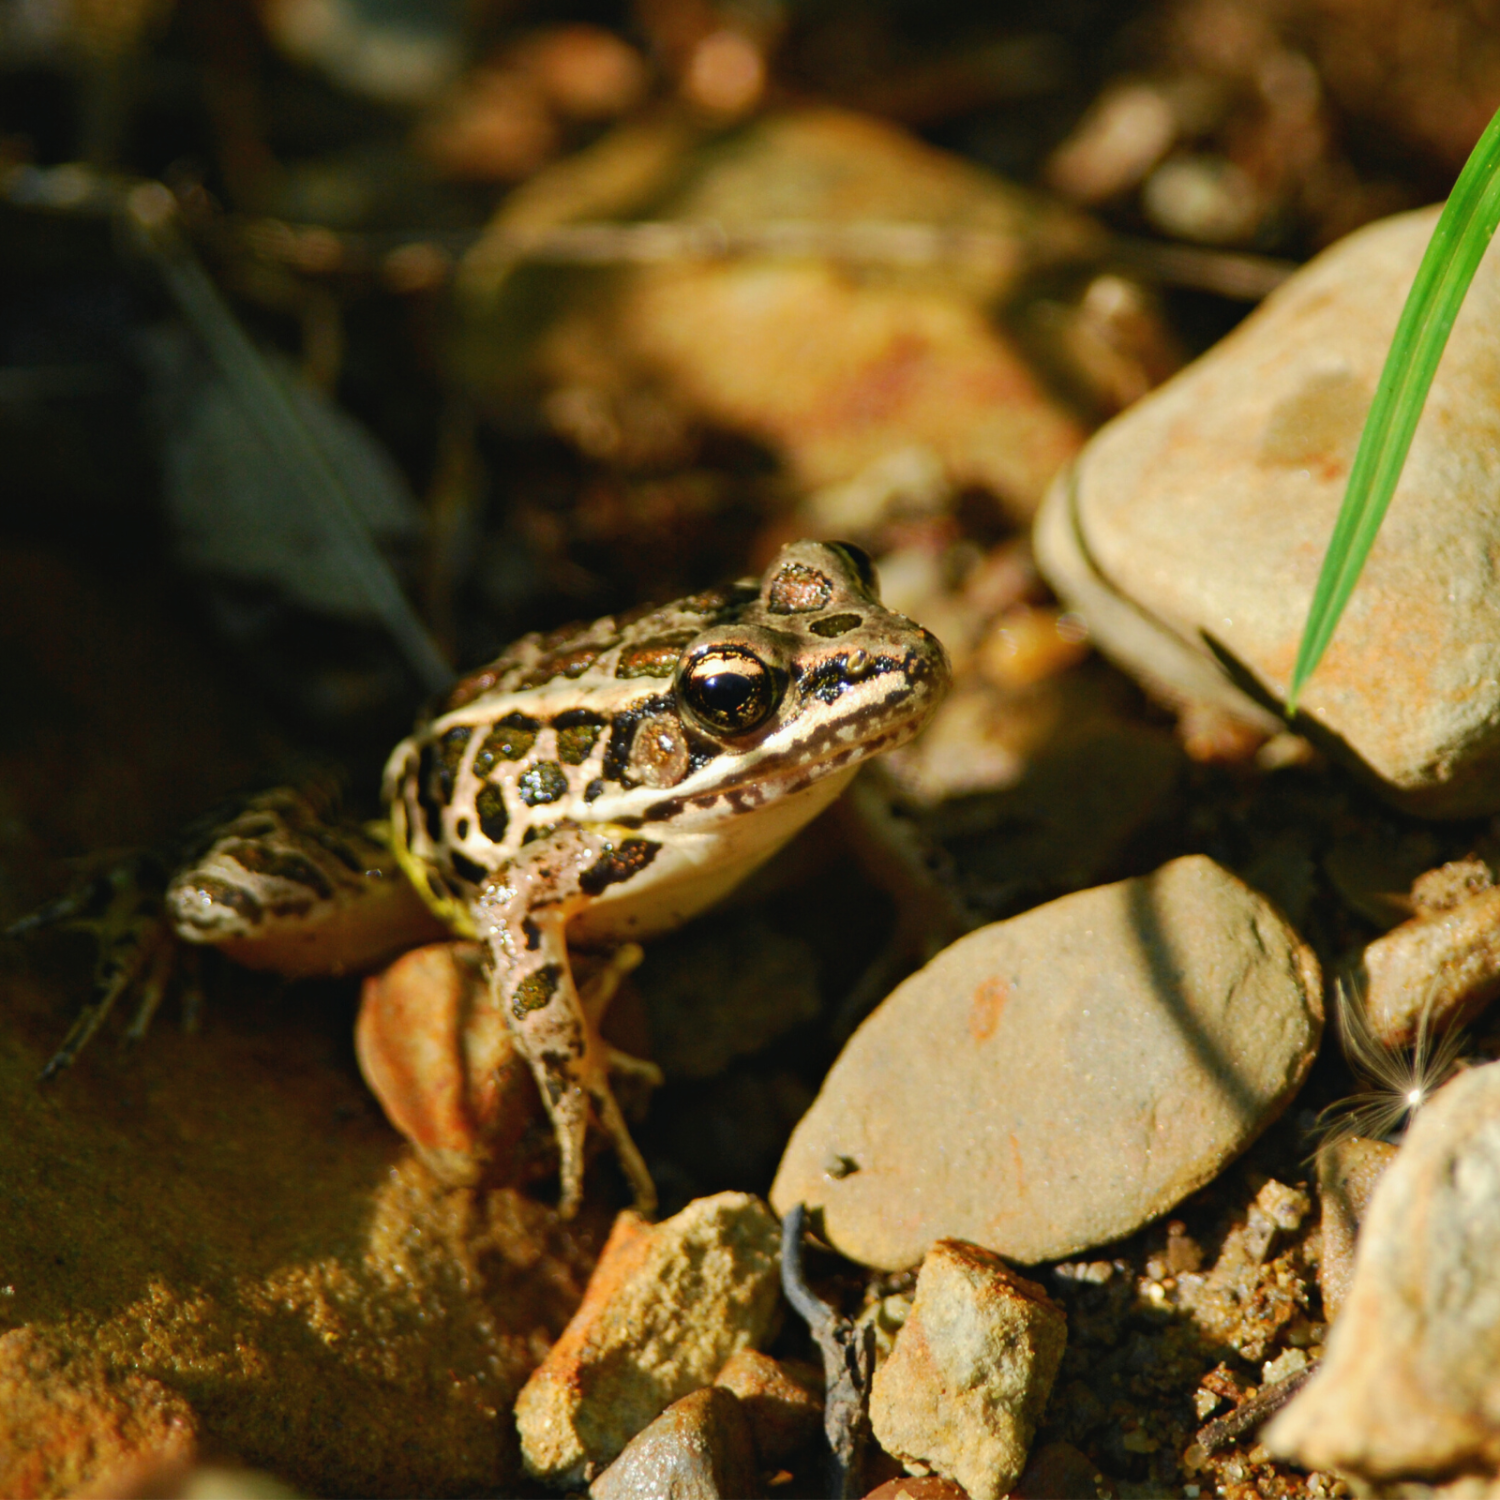 Frog sitting in rocky area